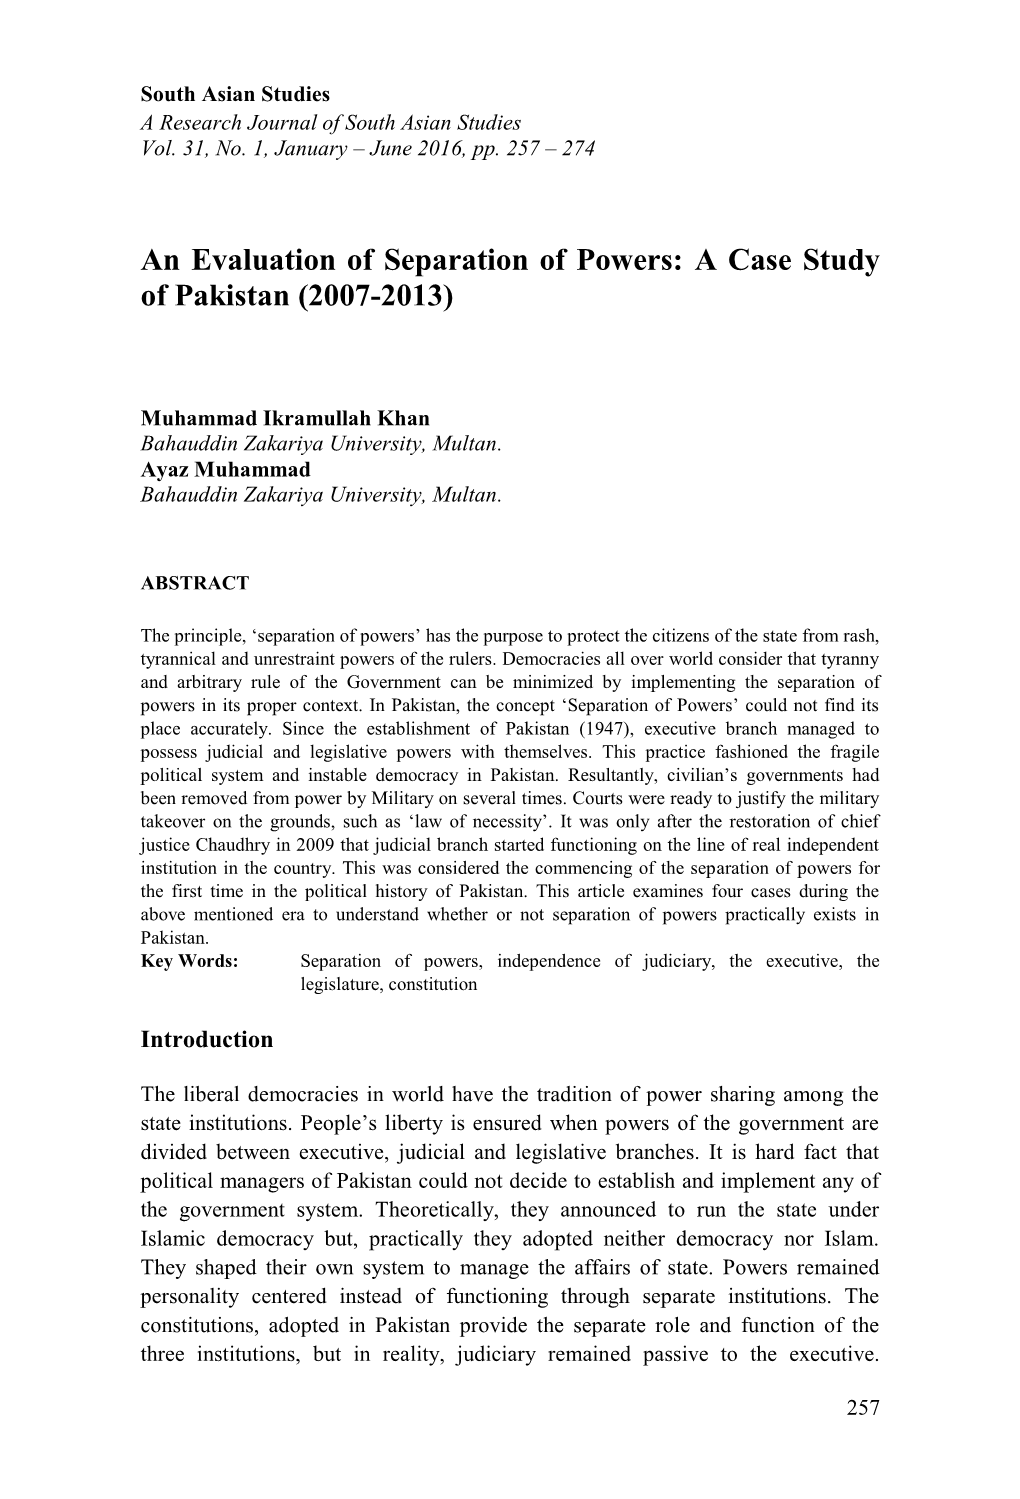 An Evaluation of Separation of Powers: a Case Study of Pakistan (2007-2013)